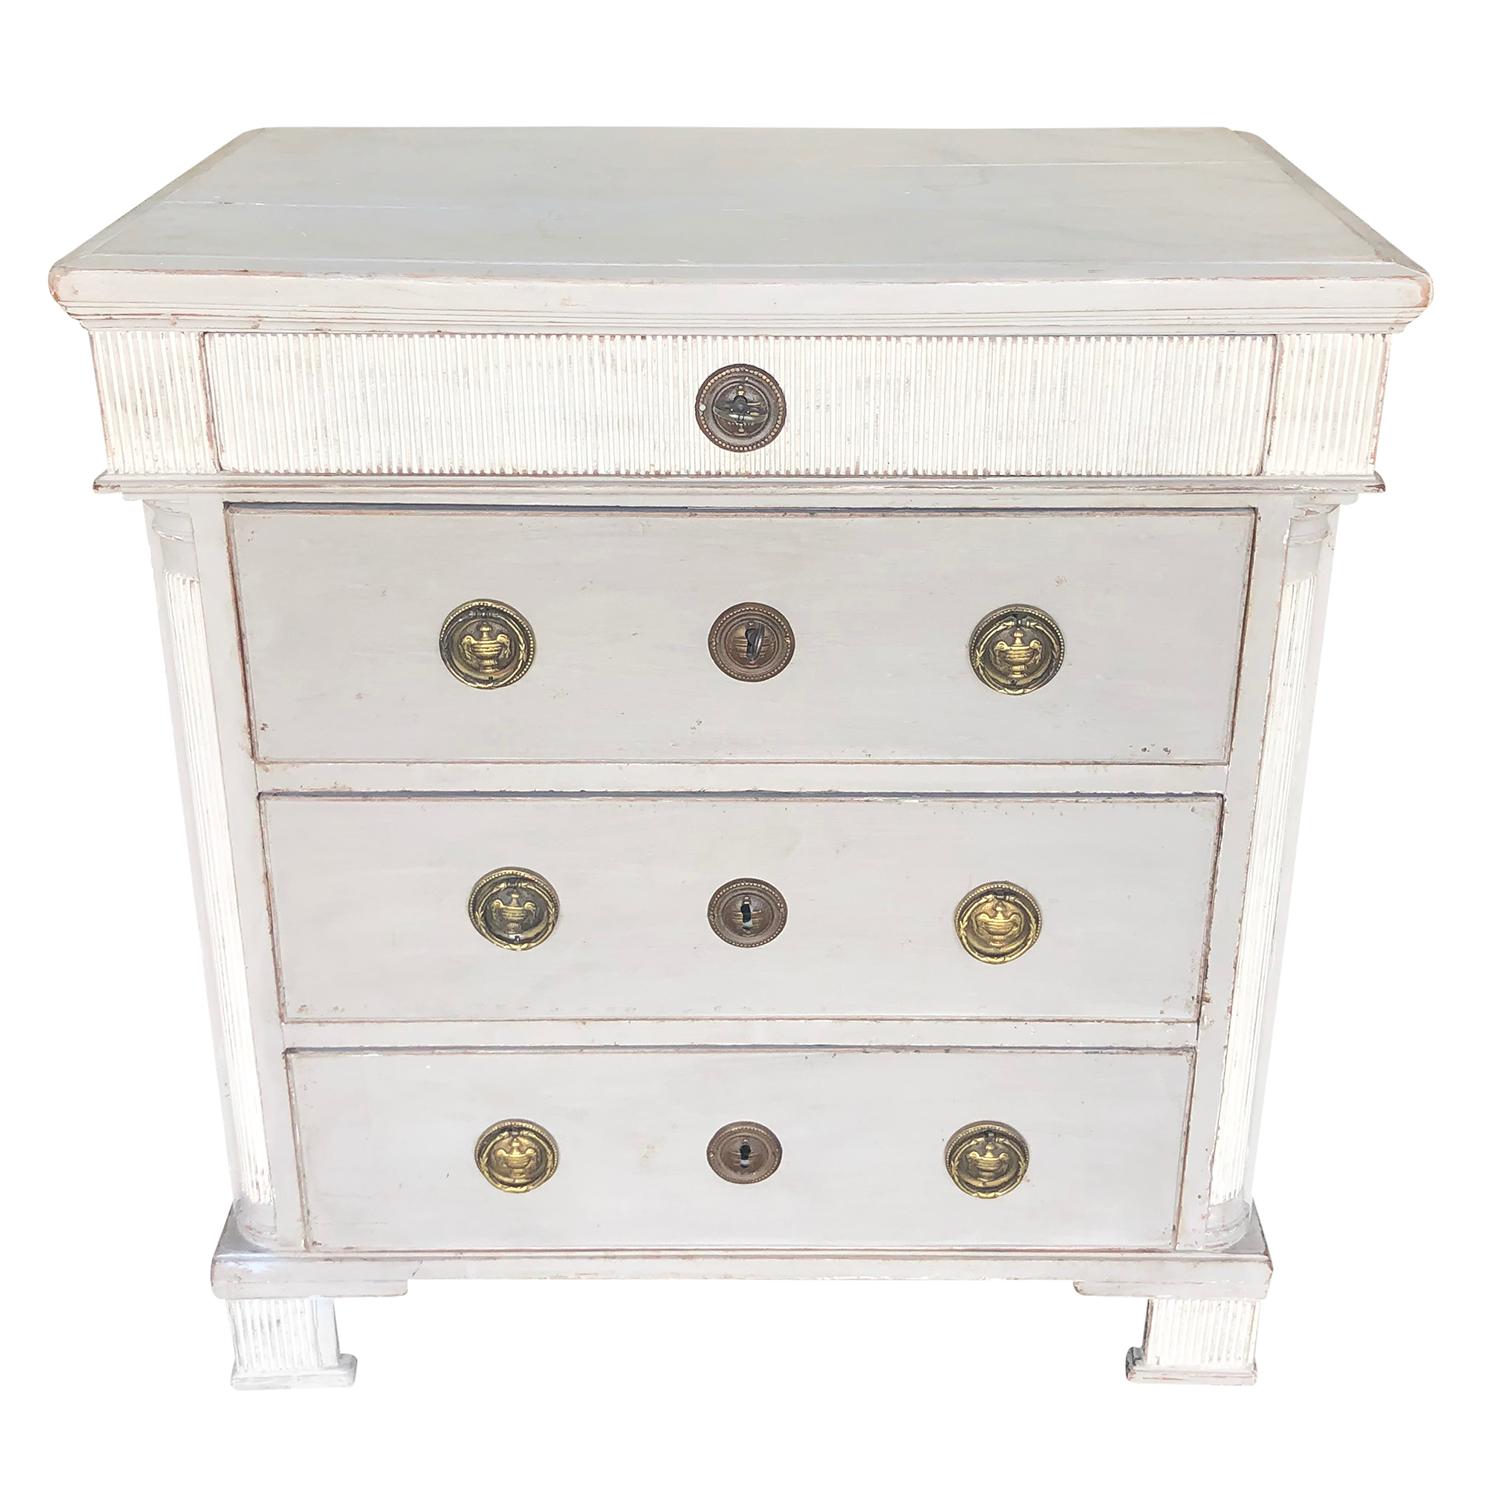 A 19th Century Swedish Gustavian Neoclassic chest with a painted faux finish marble top, in good condition. The antique Scandinavian chest is made of hand crafted Pinewood, richly carved with delicate lines, four drawers, and a grey-white-cream